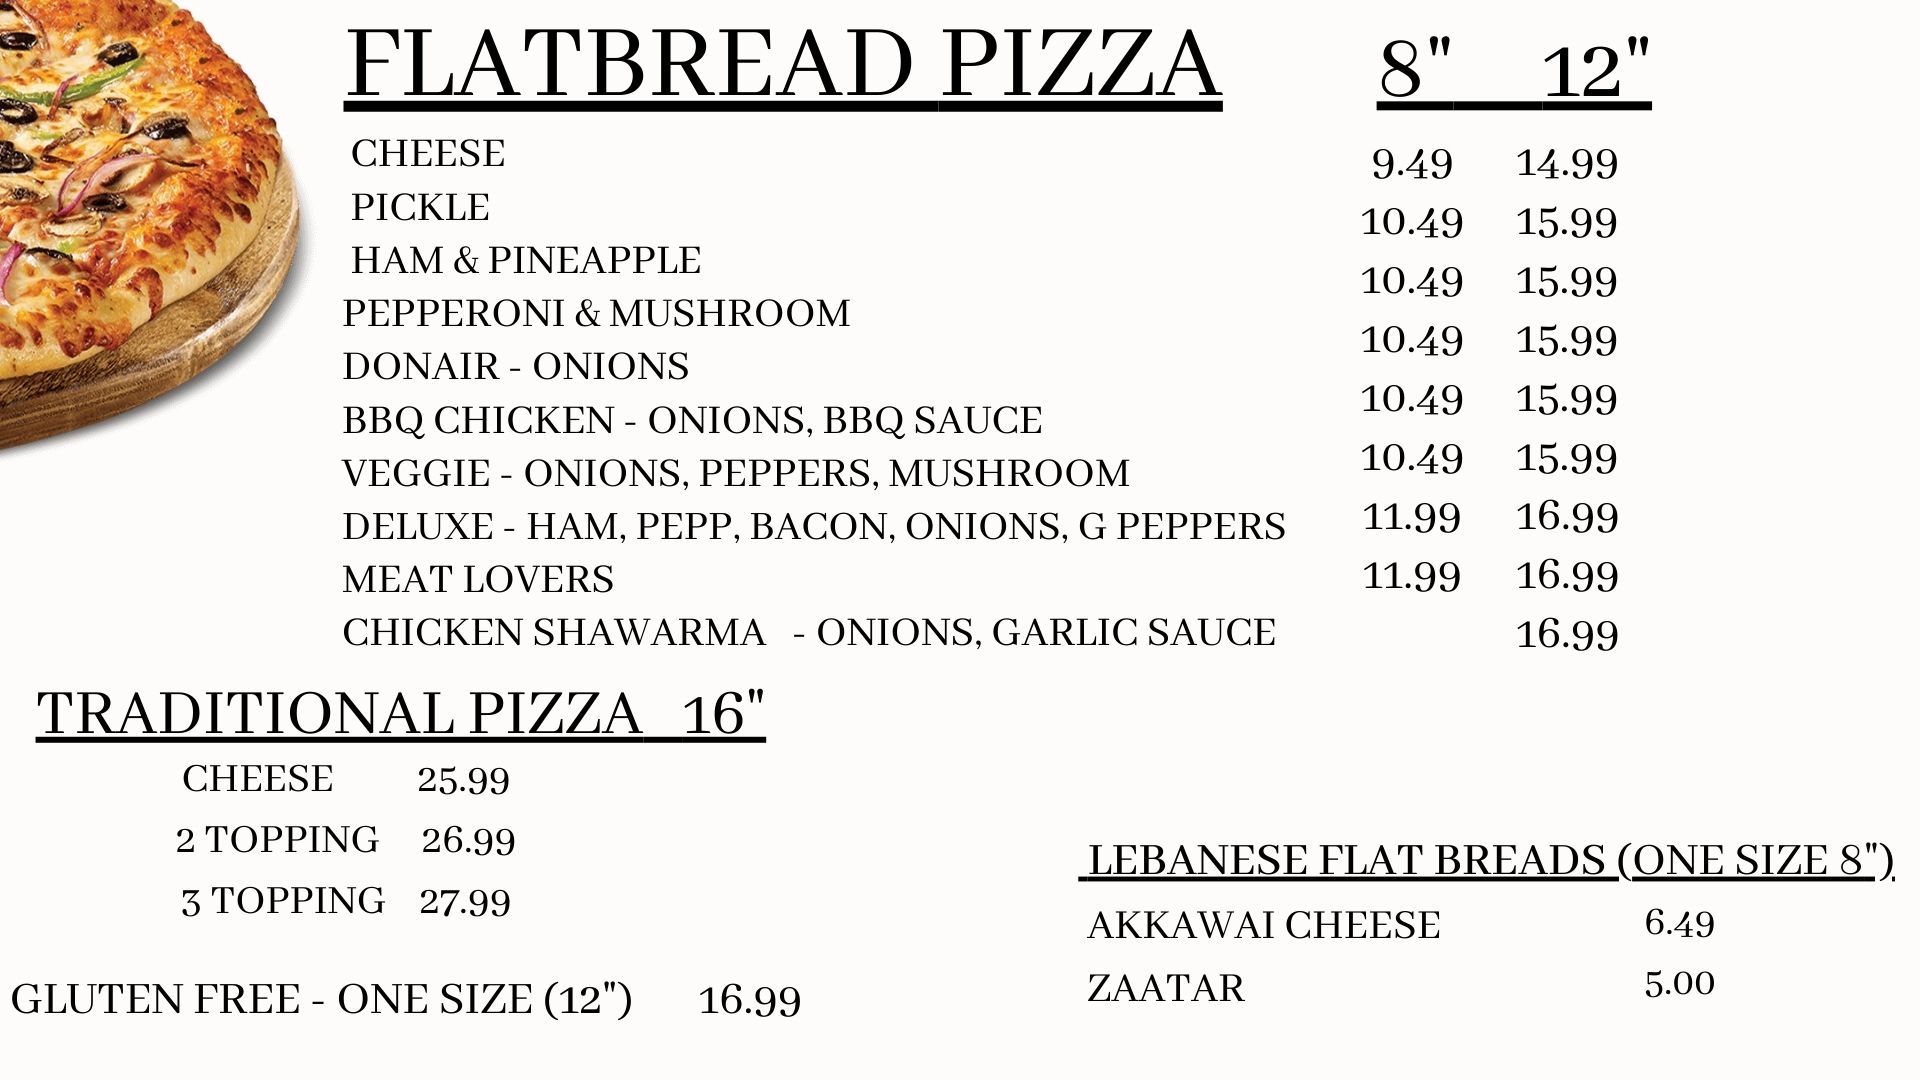 Flatbread Pizza, Traditional Pizza, Lebanese Flat Breads